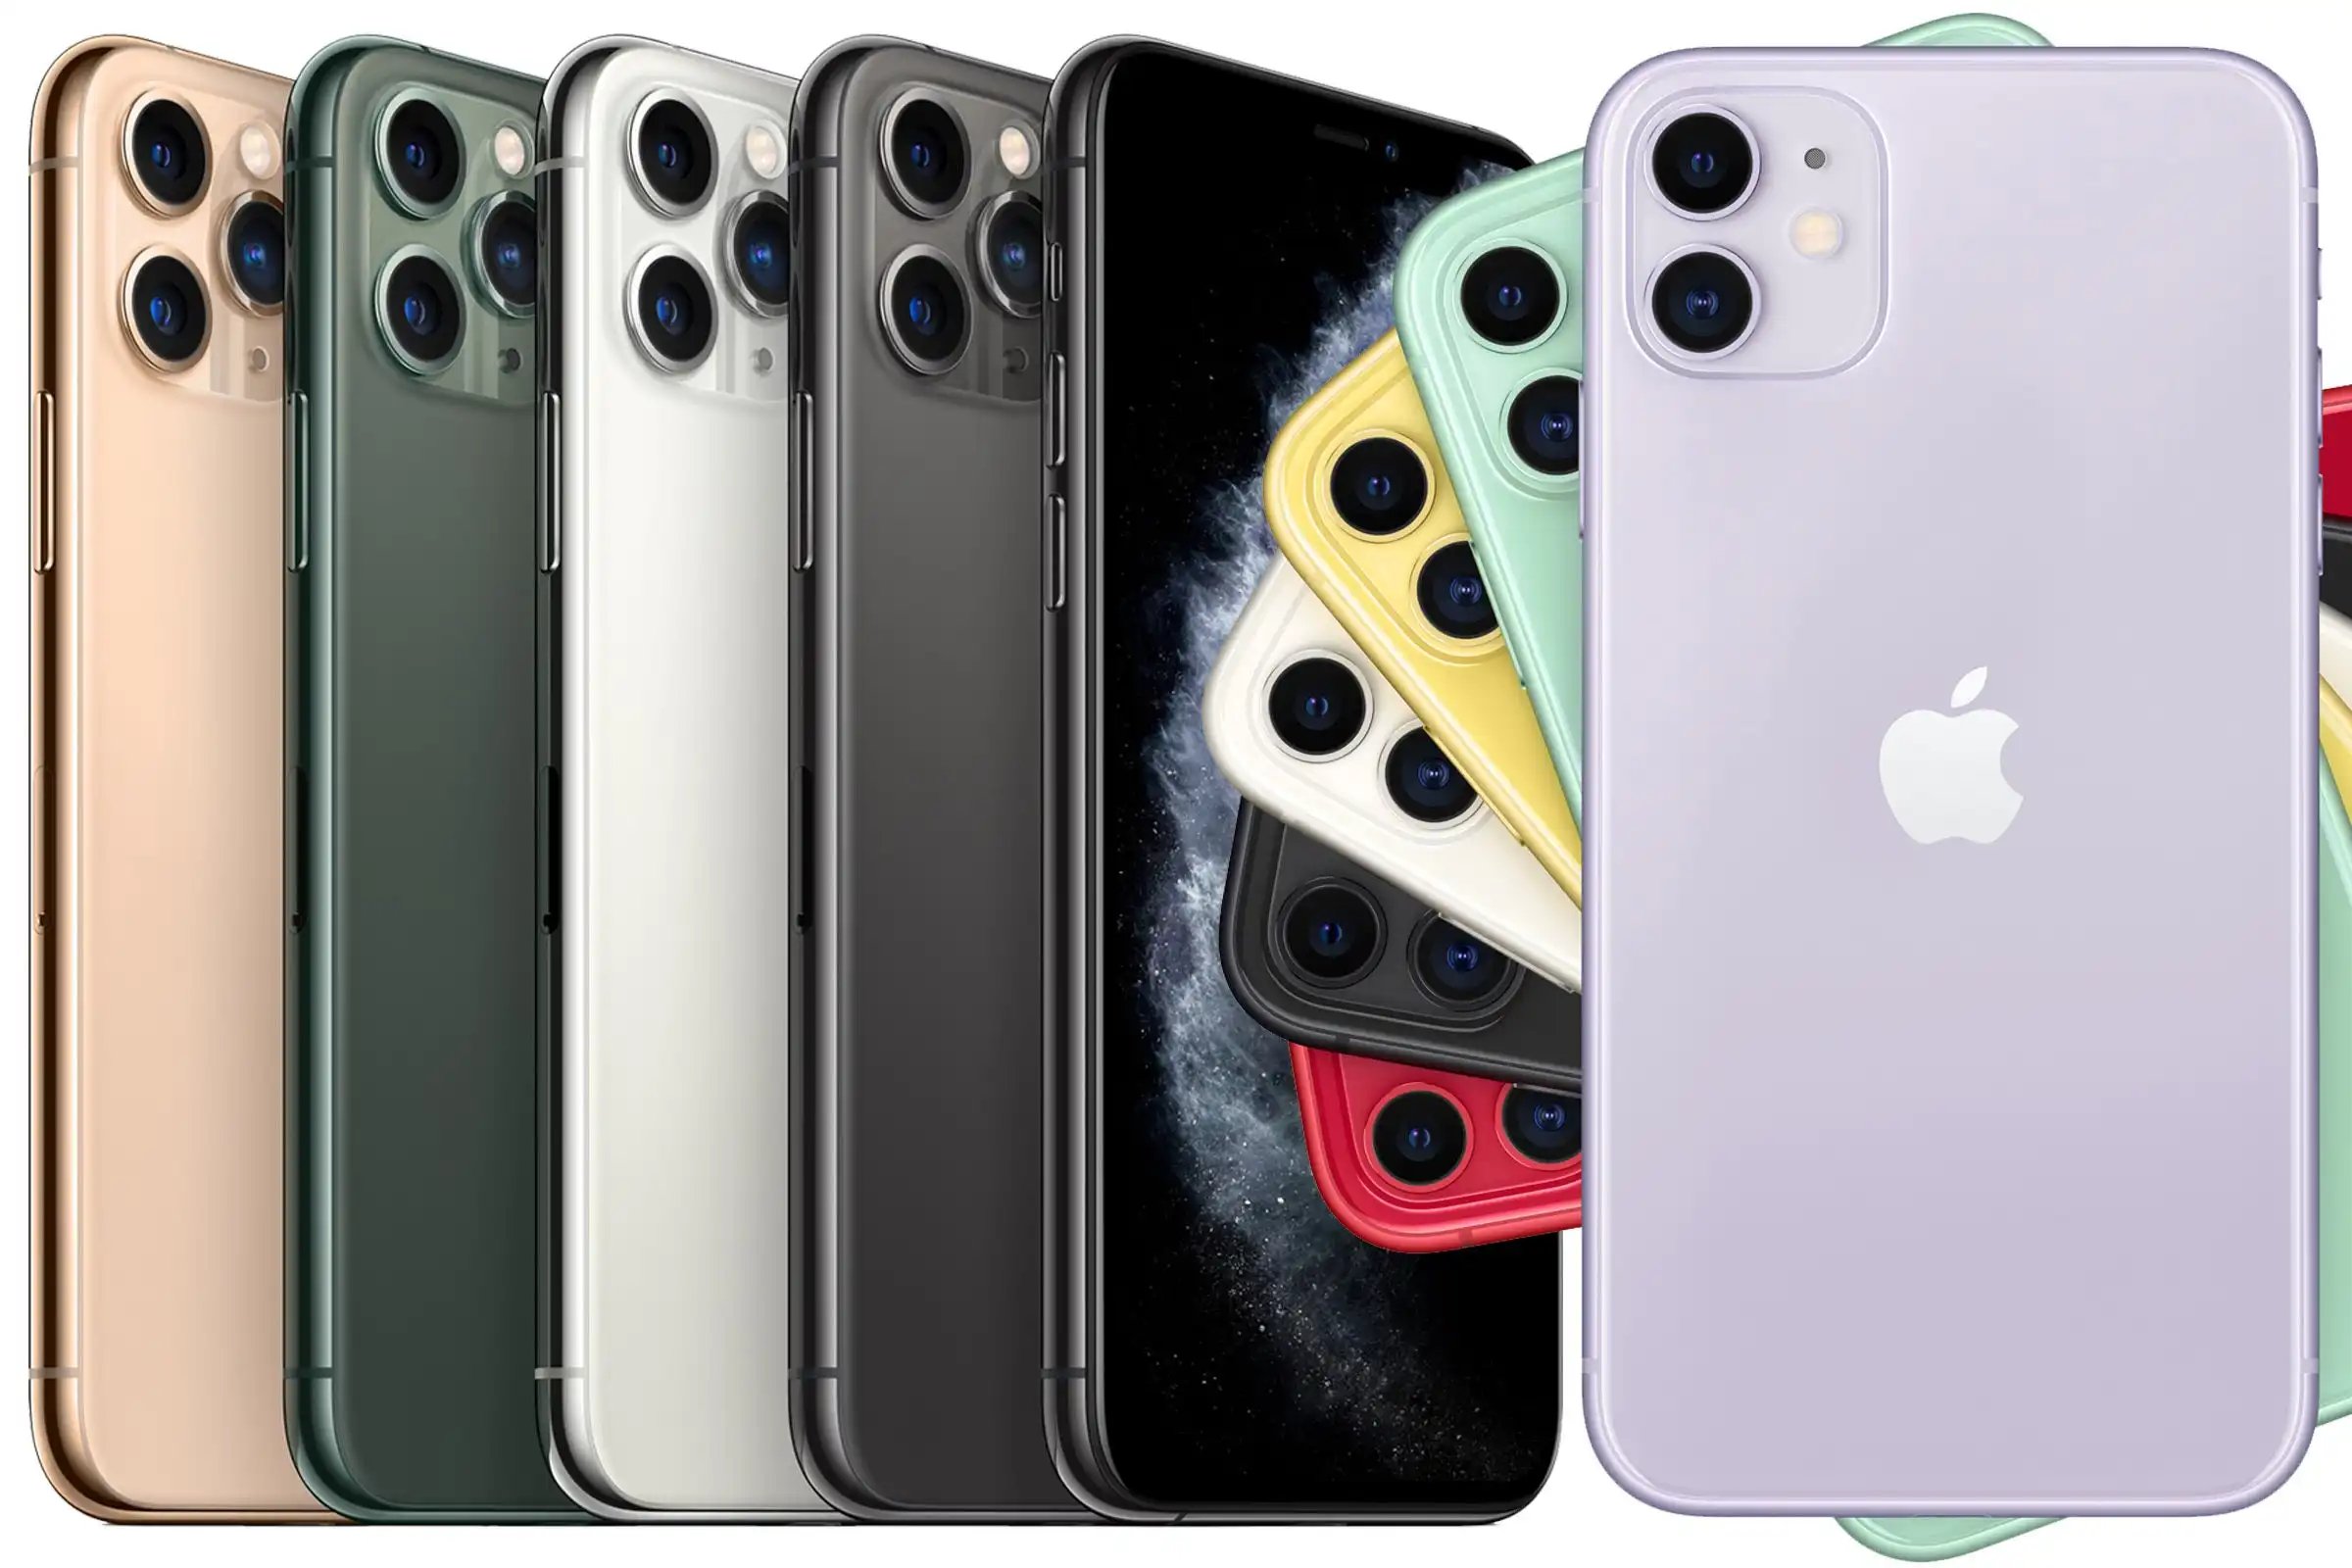 iphone-11-iphone-11-pro-iphone-11-pro-max-india-pricing-is-here